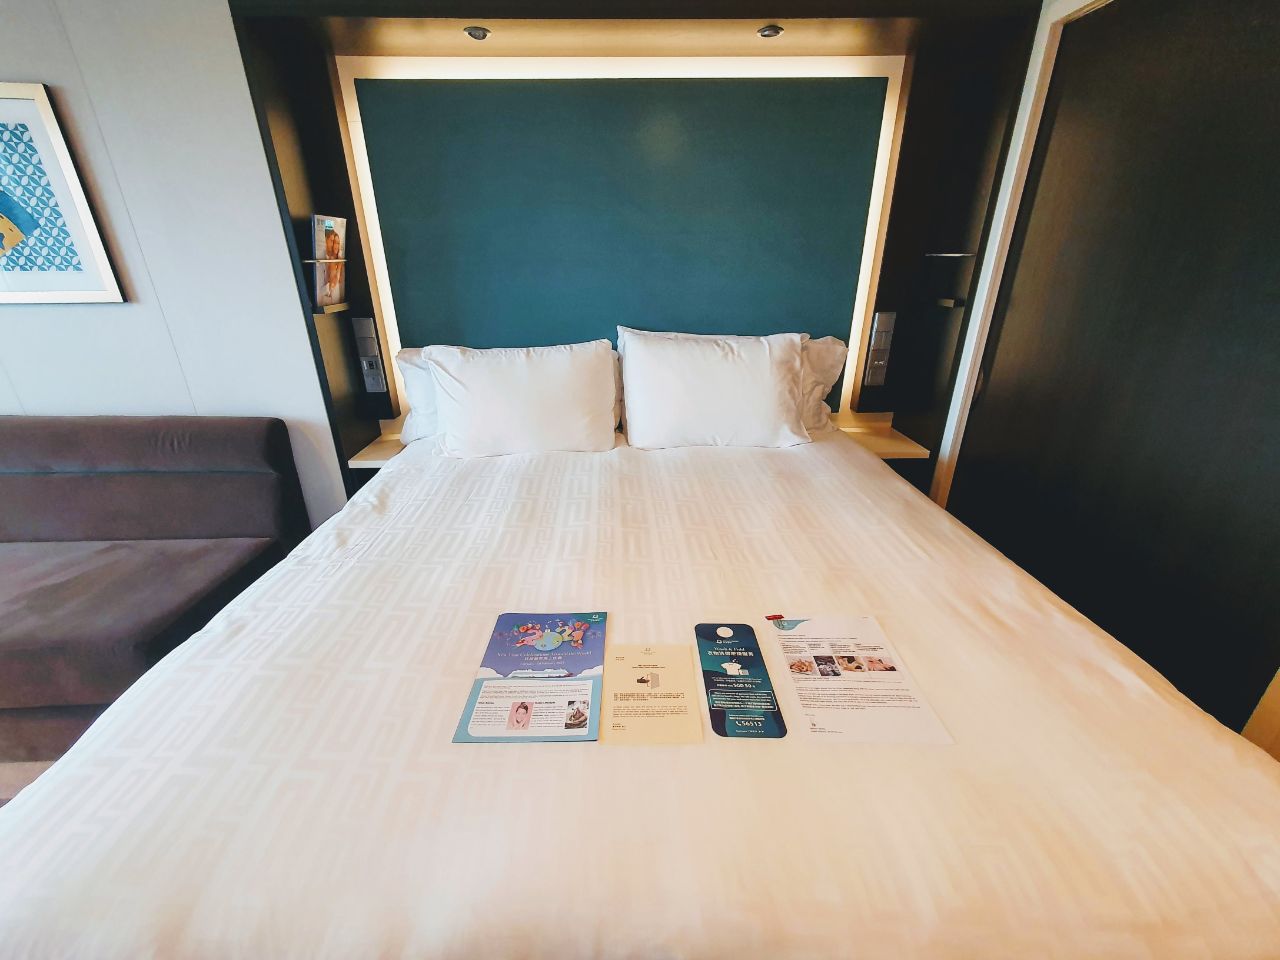 Stateroom bed